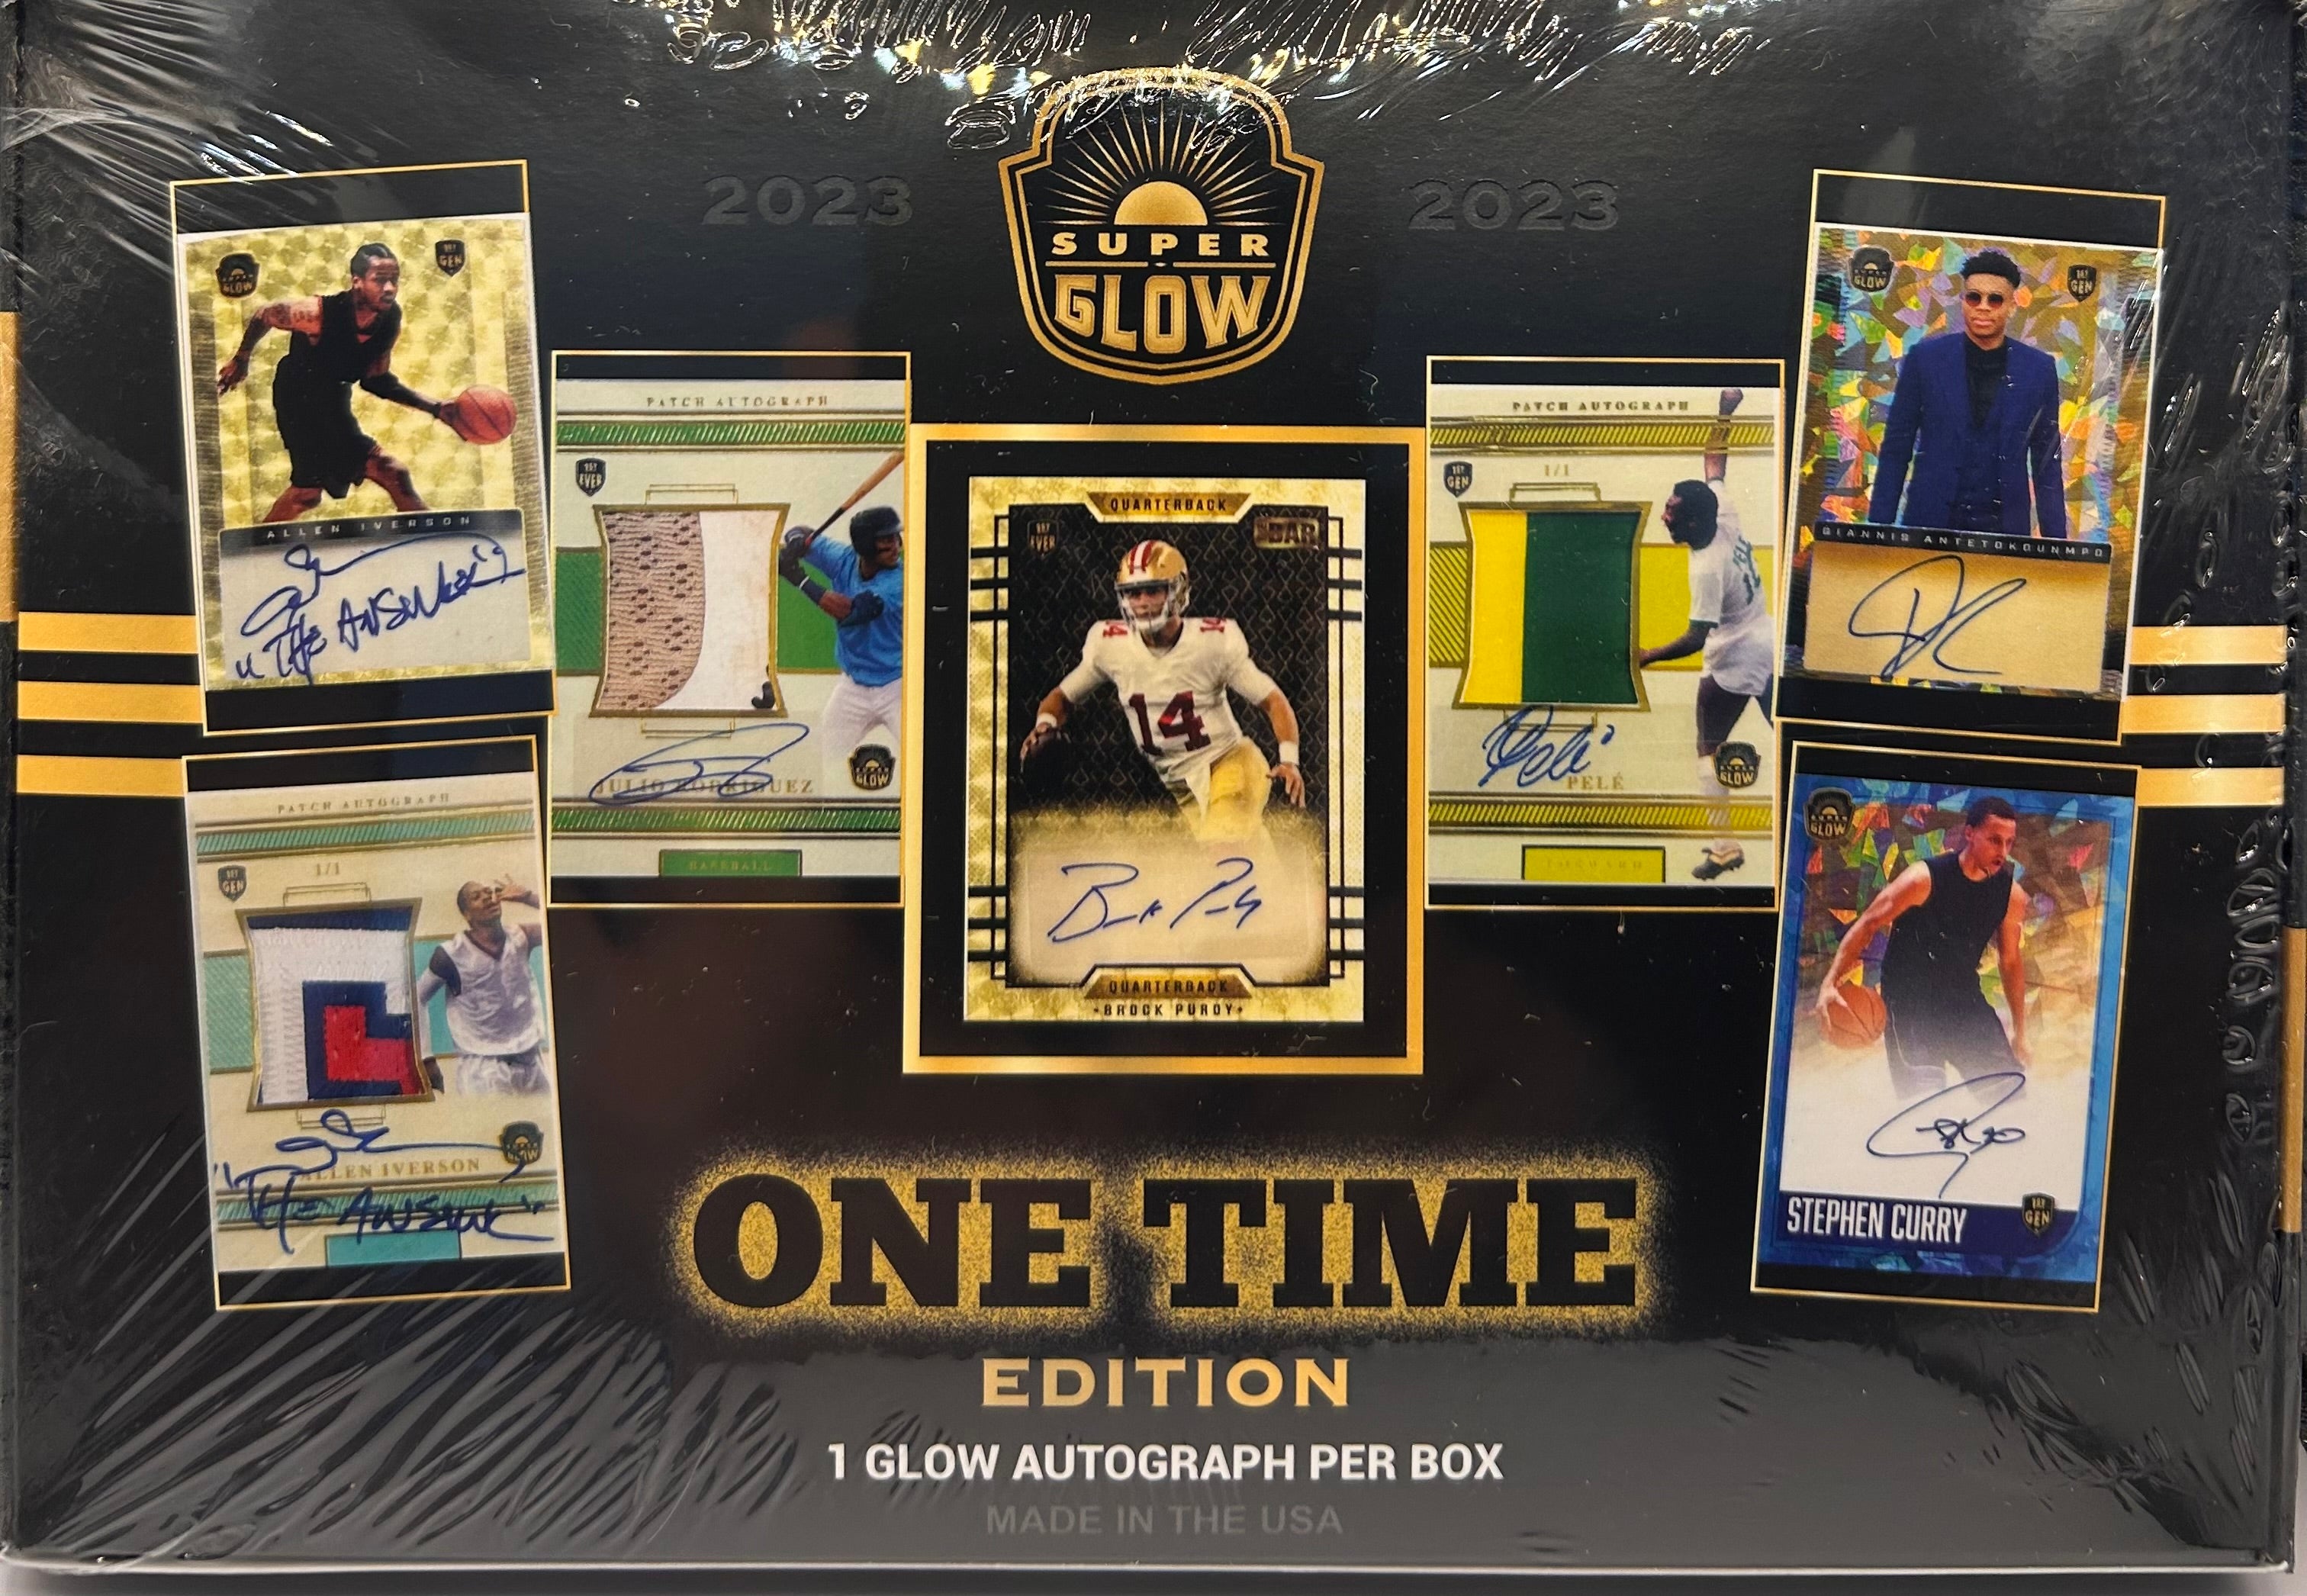 2023 Super Glow One Time Edition Series 1 Box